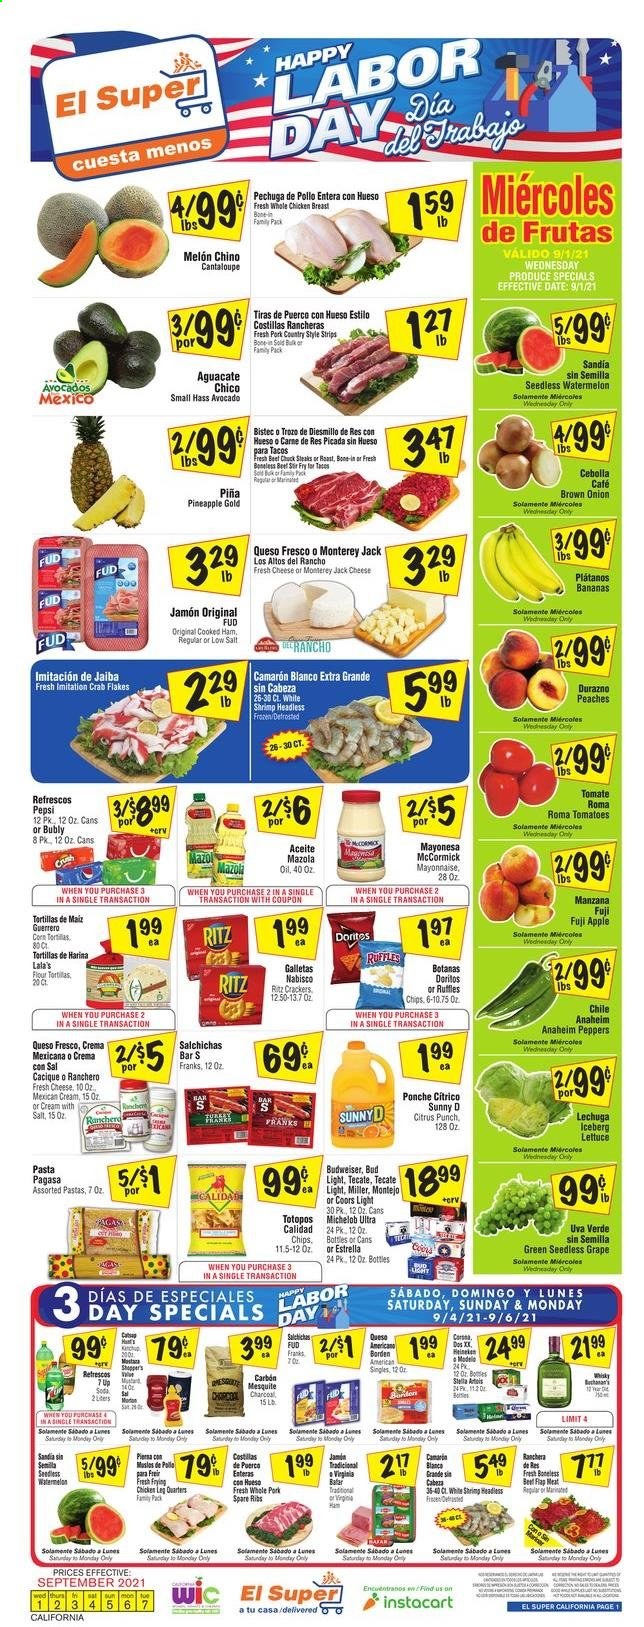 thumbnail - El Super Flyer - 09/01/2021 - 09/07/2021 - Sales products - tortillas, cantaloupe, tomatoes, lettuce, peppers, avocado, bananas, watermelon, Fuji apple, crab, shrimps, pasta, cooked ham, ham, virginia ham, Monterey Jack cheese, queso fresco, strips, crackers, RITZ, chips, Ruffles, Pepsi, 7UP, fruit punch, soda, whisky, beer, Bud Light, Miller, Modelo, whole chicken, chicken breasts, chicken legs, steak, pork meat, pork ribs, pork spare ribs, Budweiser, Stella Artois, melons, Coors, Michelob, peaches. Page 1.